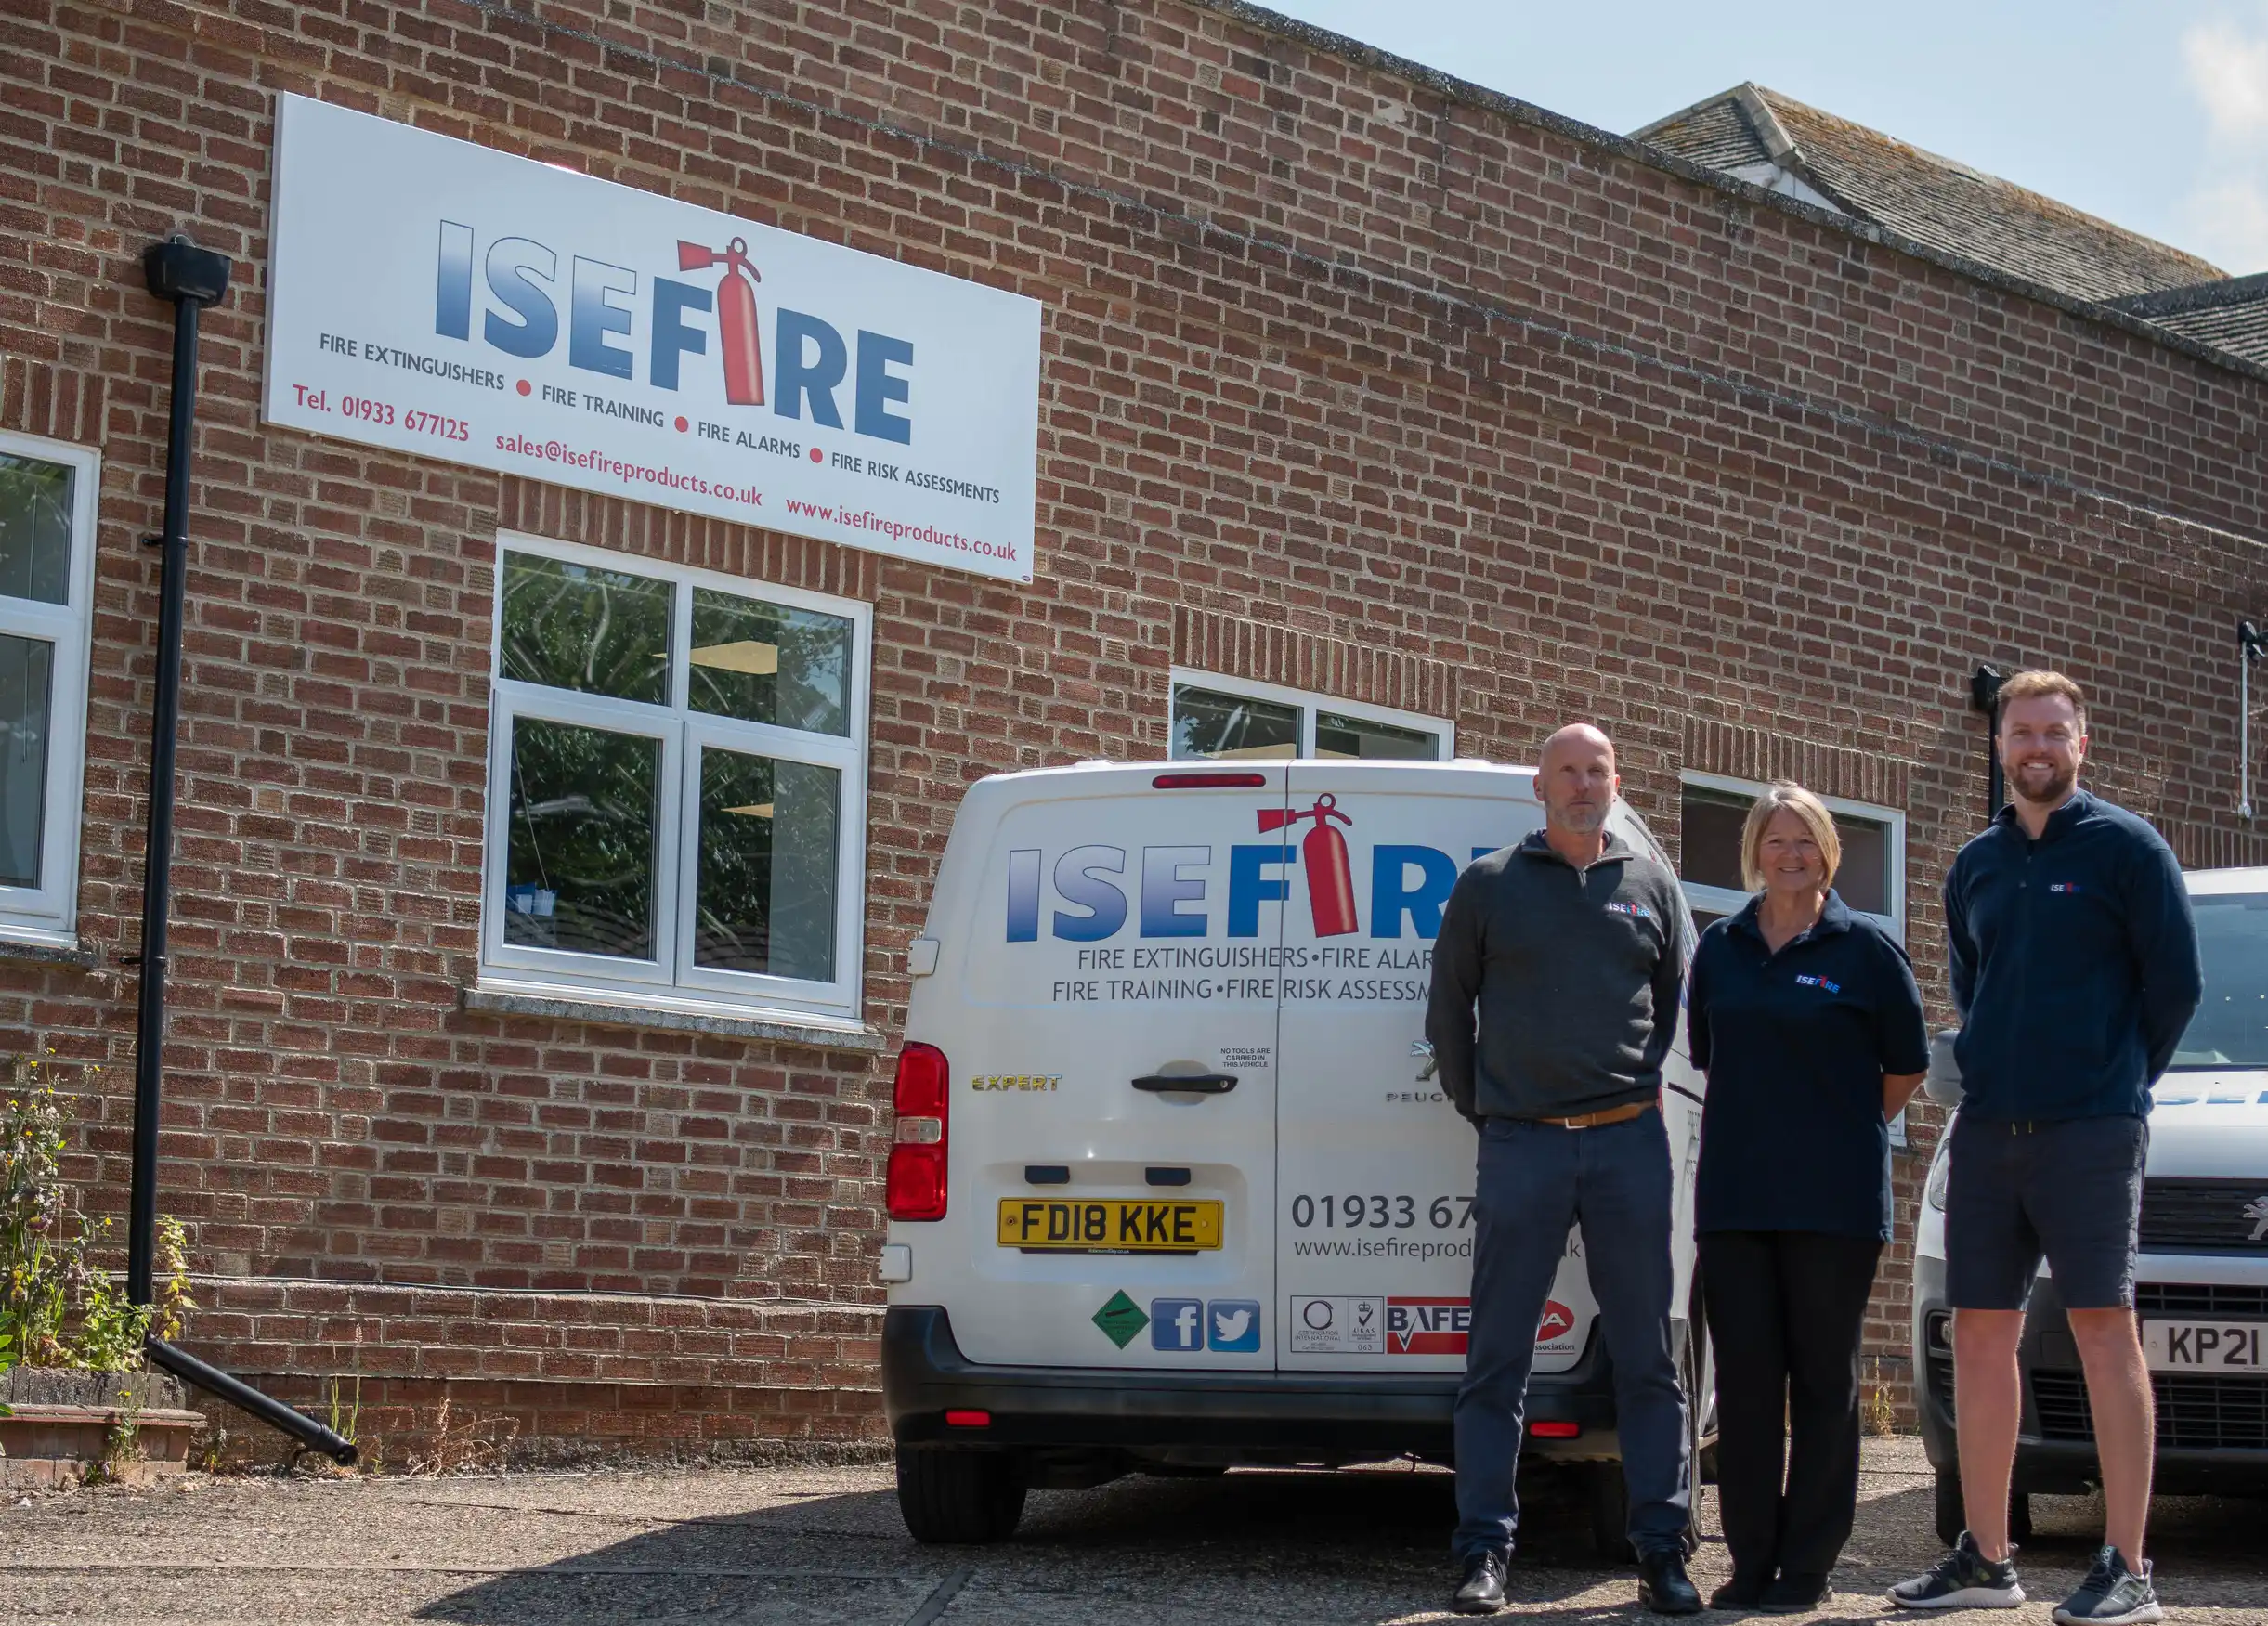 ISE Fire, fire extinguisher engineers.